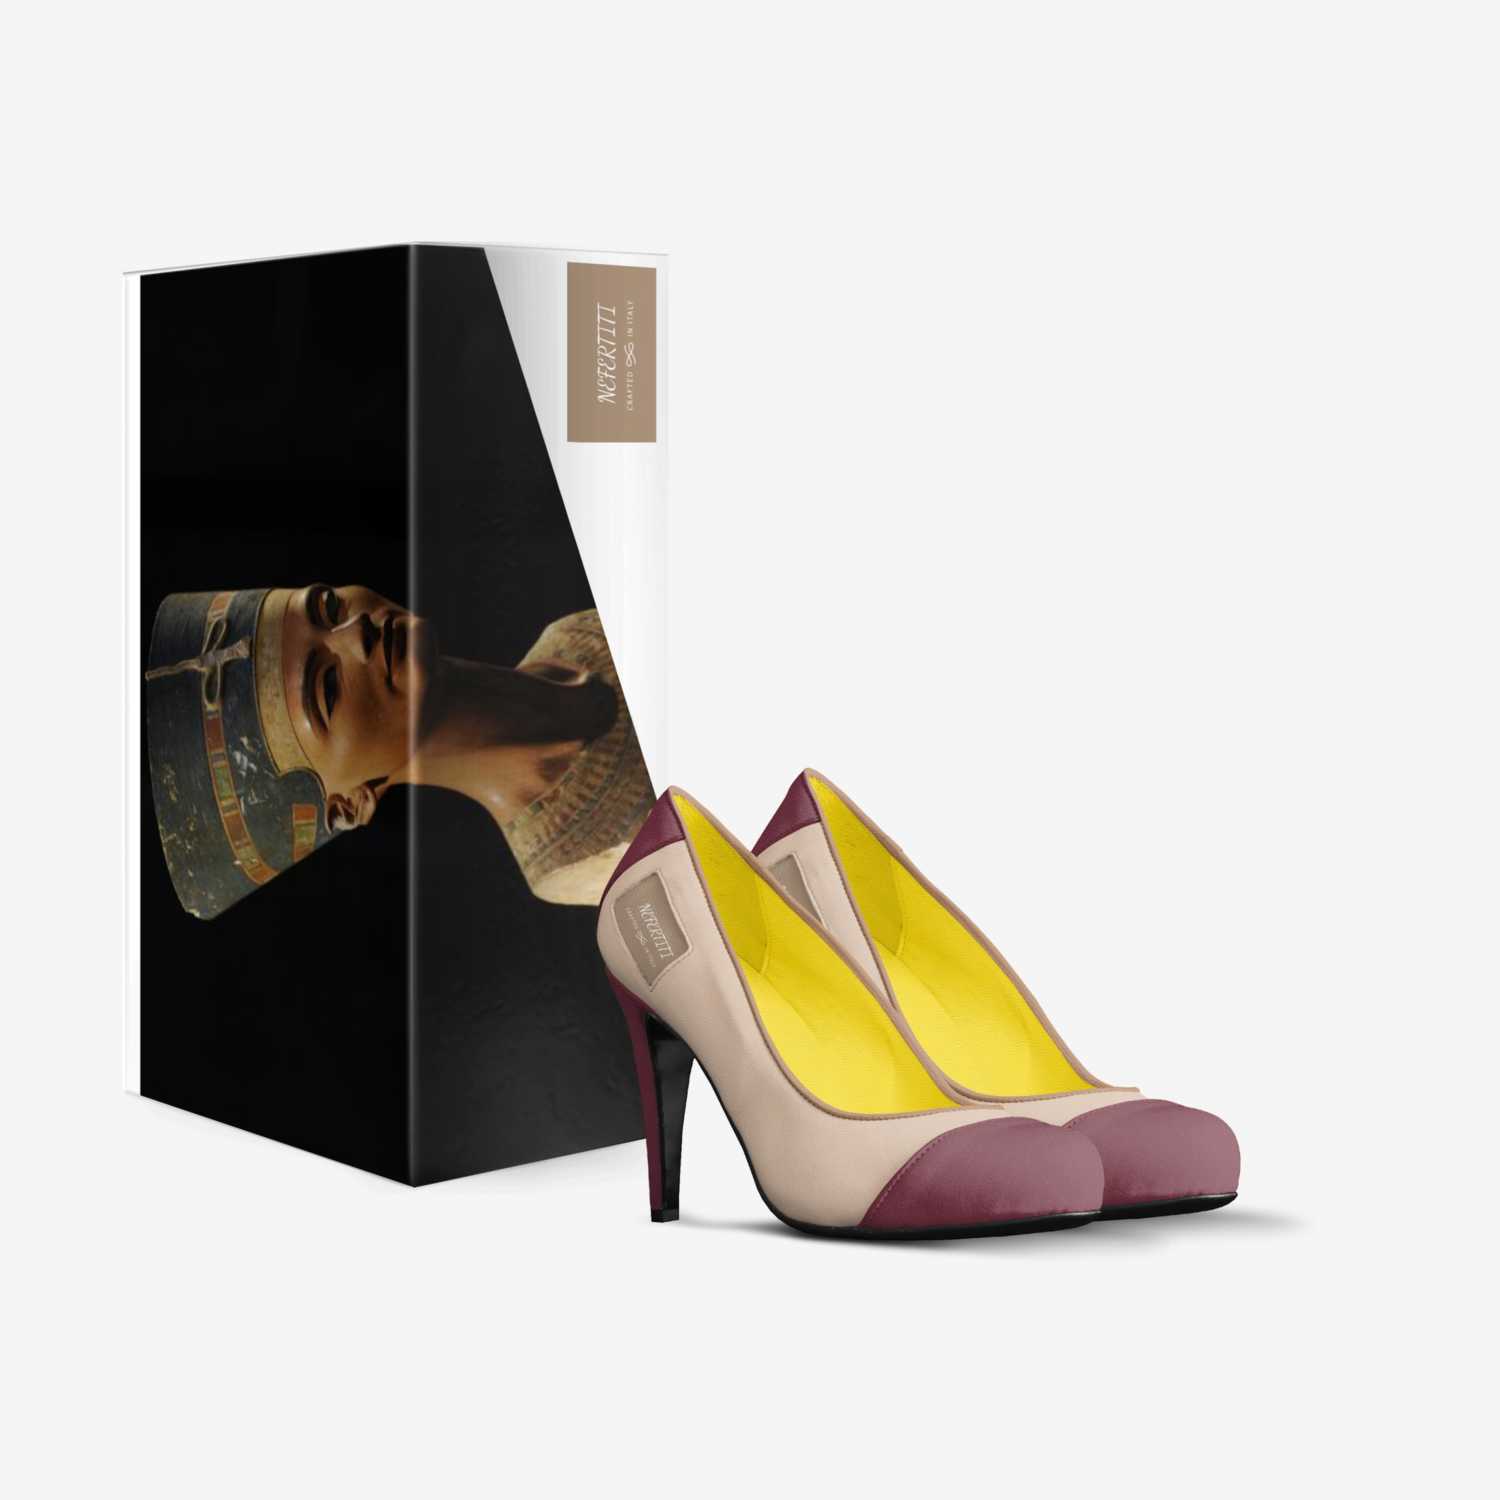 NEFERTITI custom made in Italy shoes by Troy Taylor | Box view